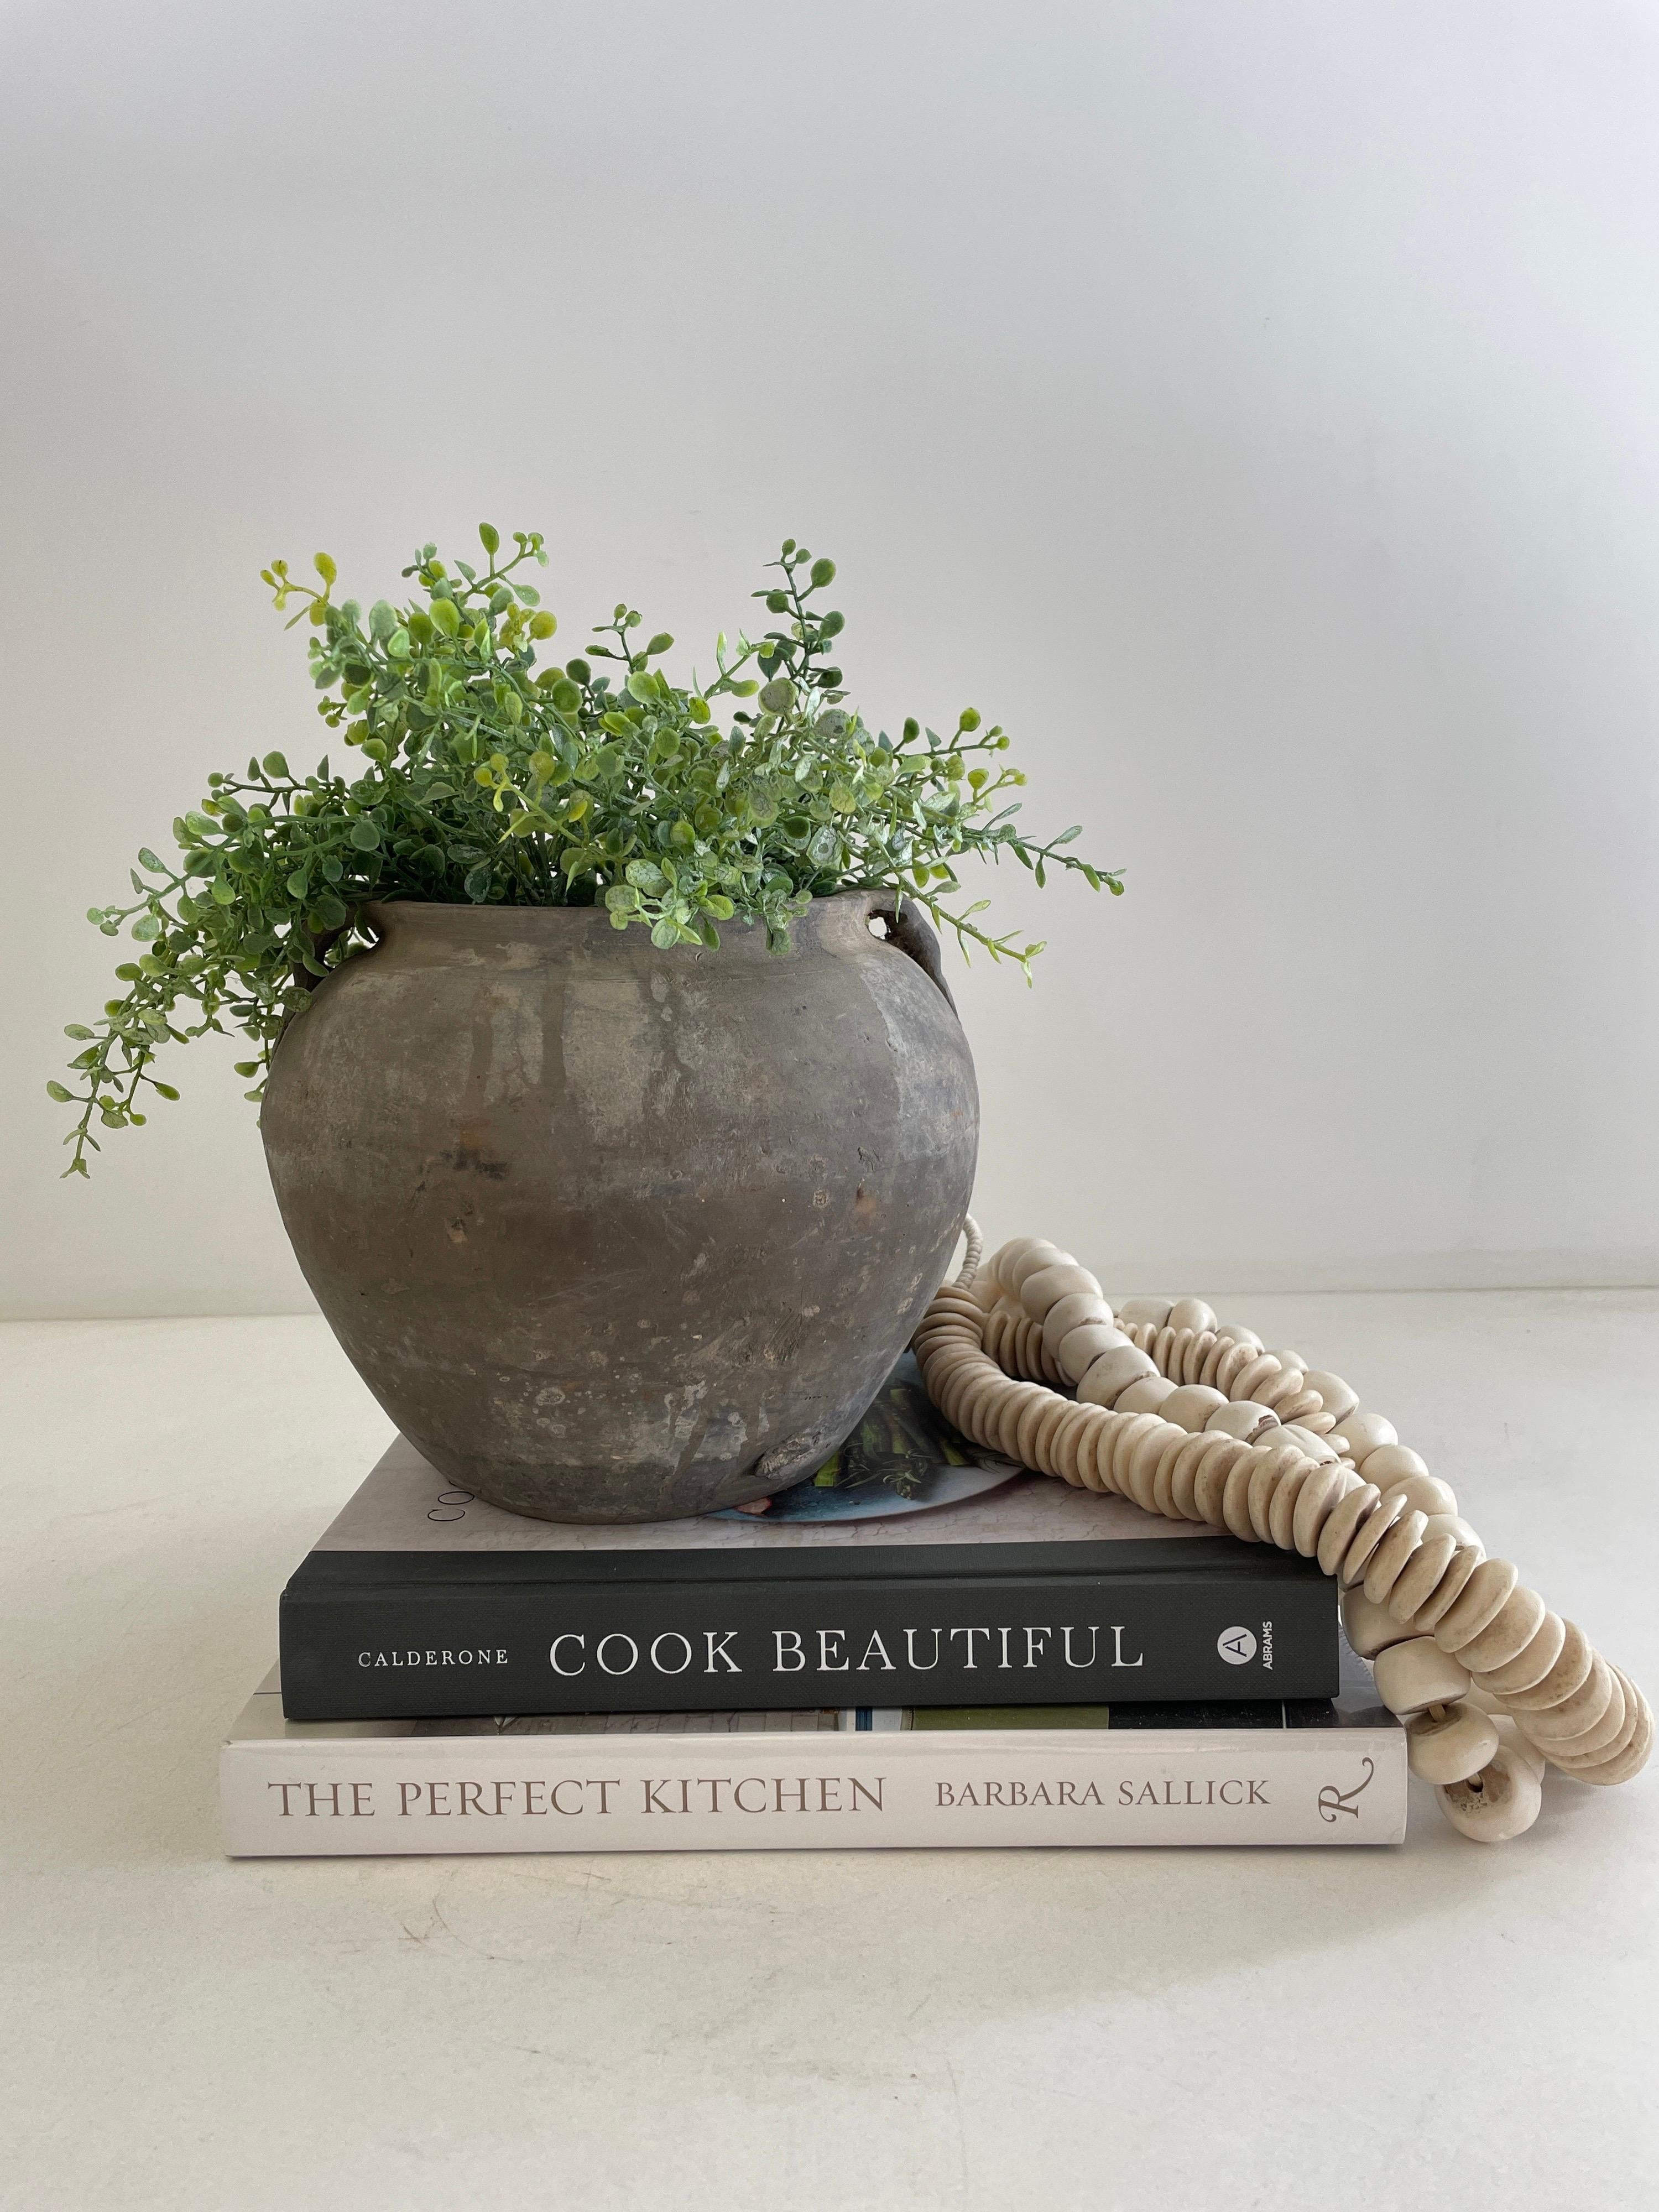 Vintage Matte Oil Pots Pottery
Beautifully terracotta rich in character, this vintage oil pot adds just the right amount of texture + warmth where you need it. Stunning matte finish with warm terra-cotta accents, and dark grey tones.
Sizing: 9